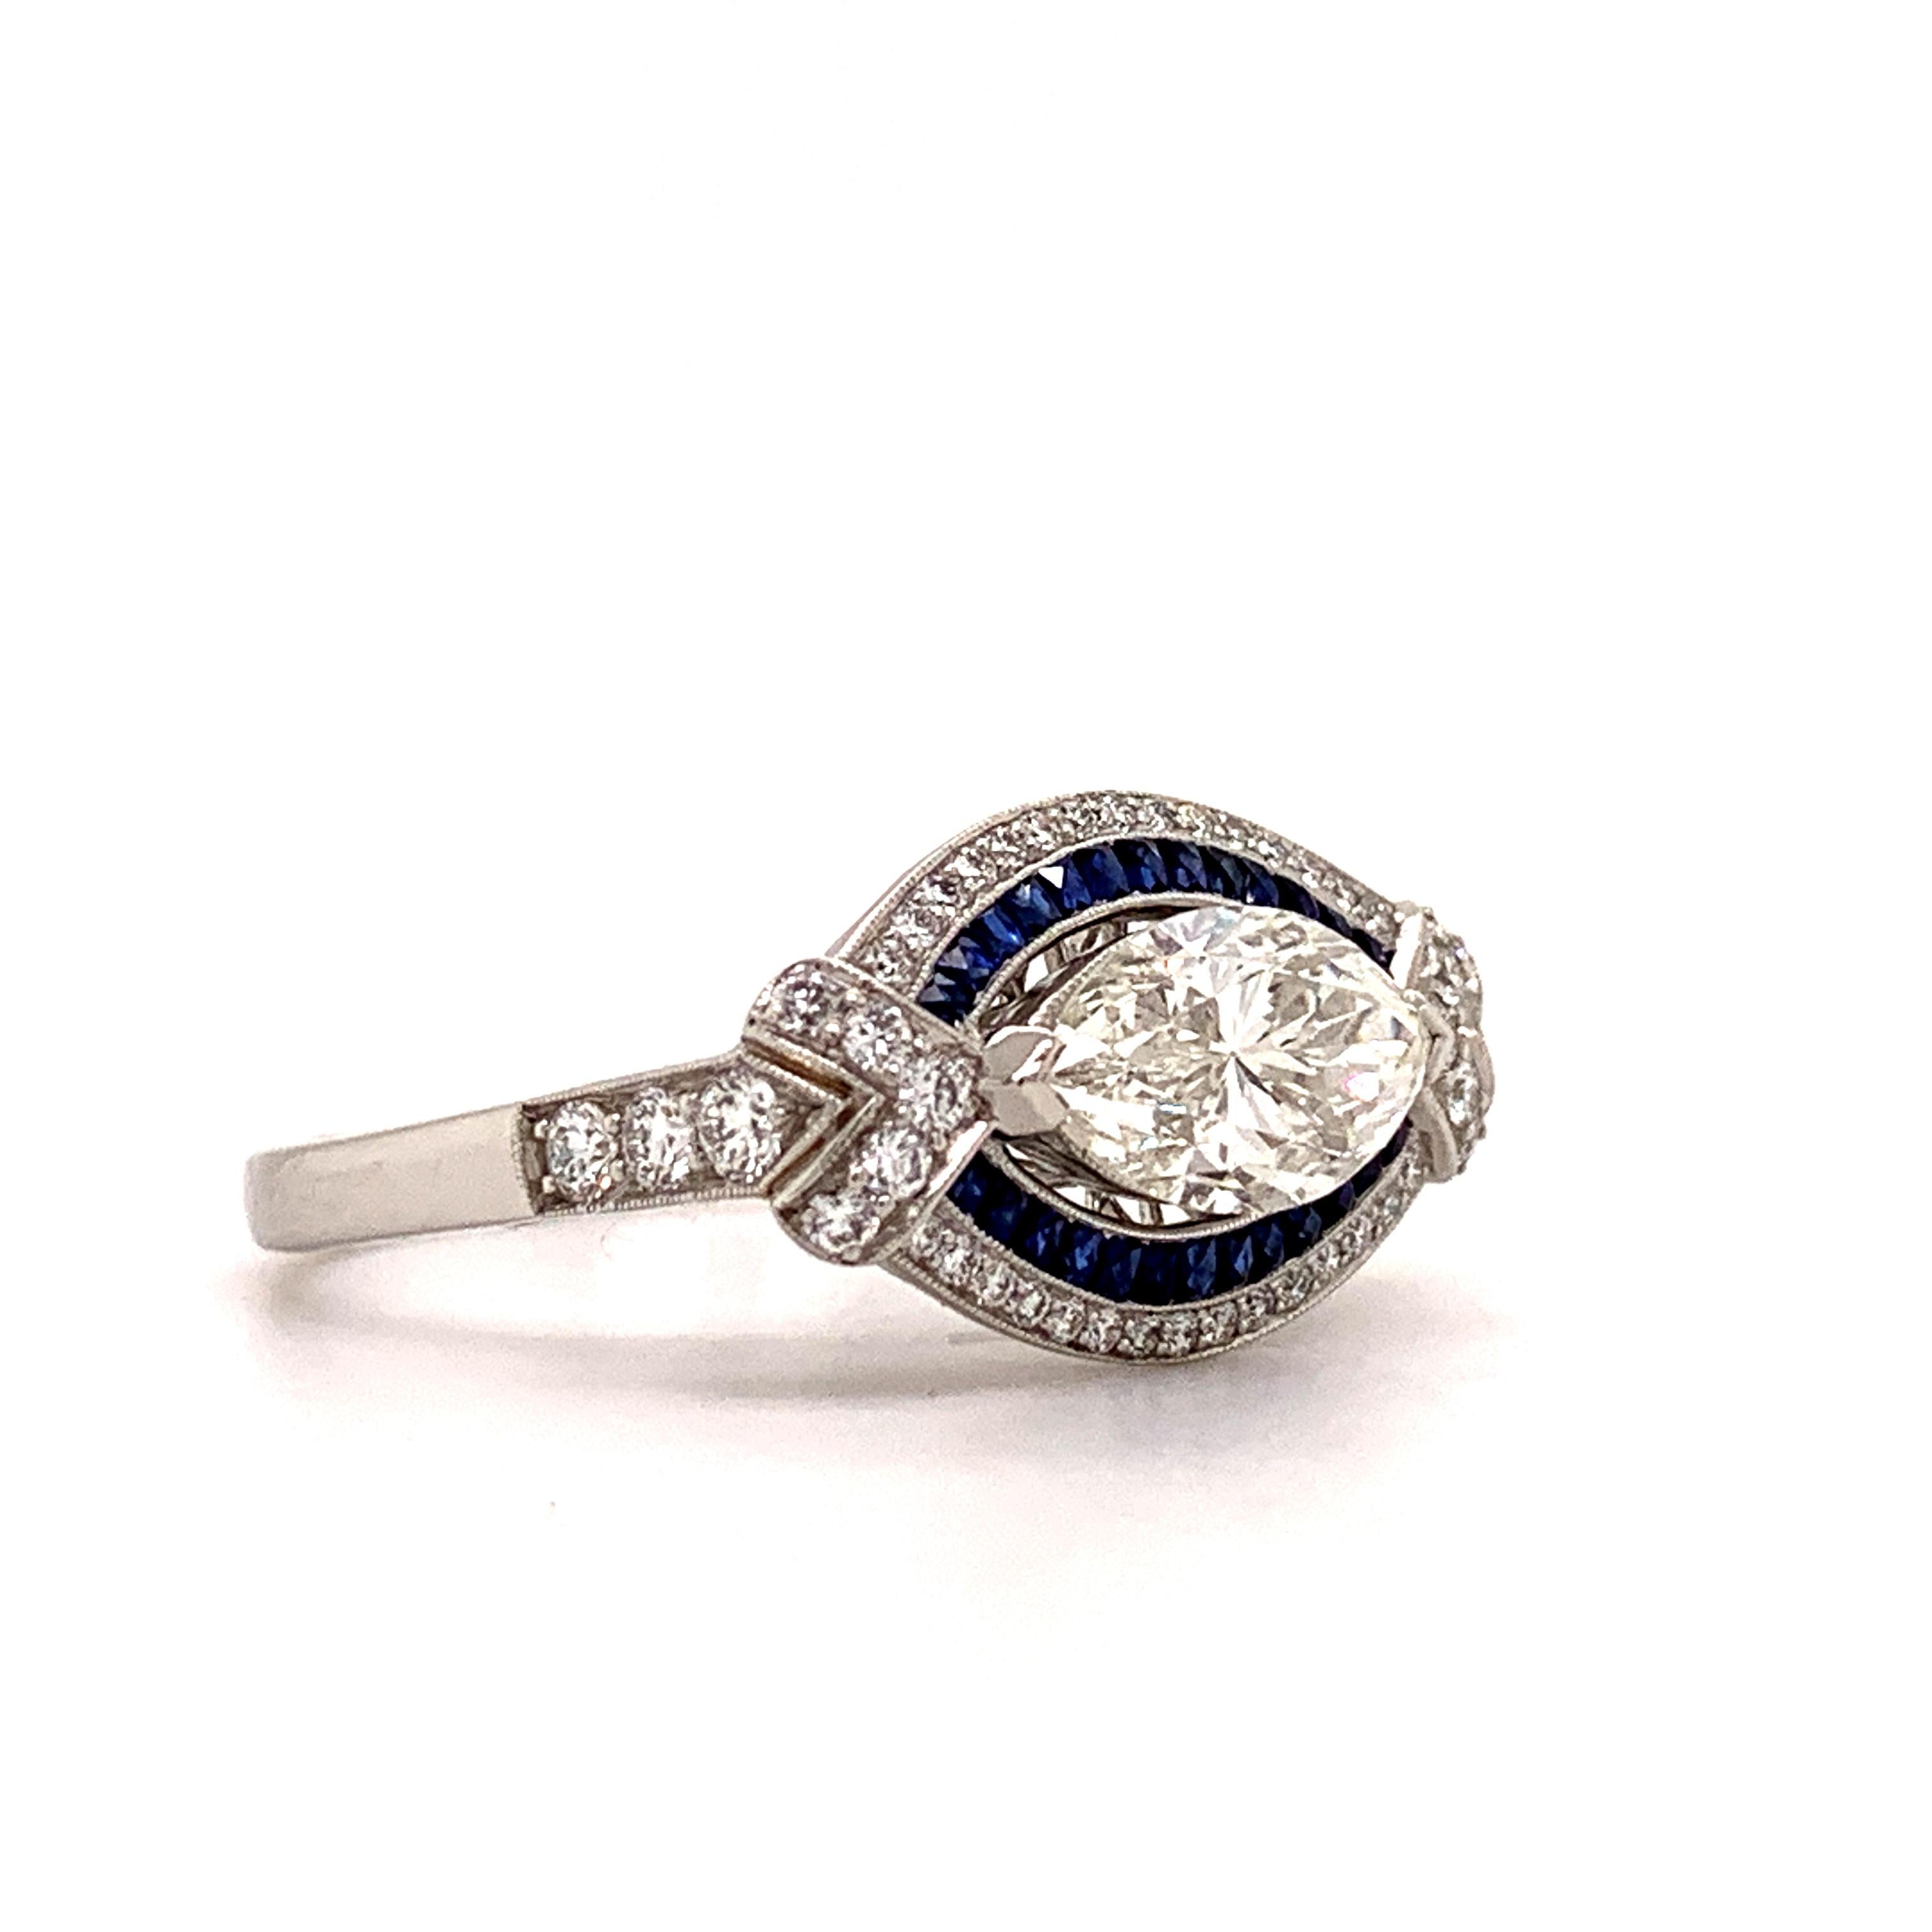 Sophia D Art Deco inspired platinum ring with pear shape center marquise diamond weighing 1.31 carats with a color and clarity of I-VS2 surrounded with beautiful sapphire stones weighing 0.25 carats and diamond weighing 0.35 carats.

Sophia D by